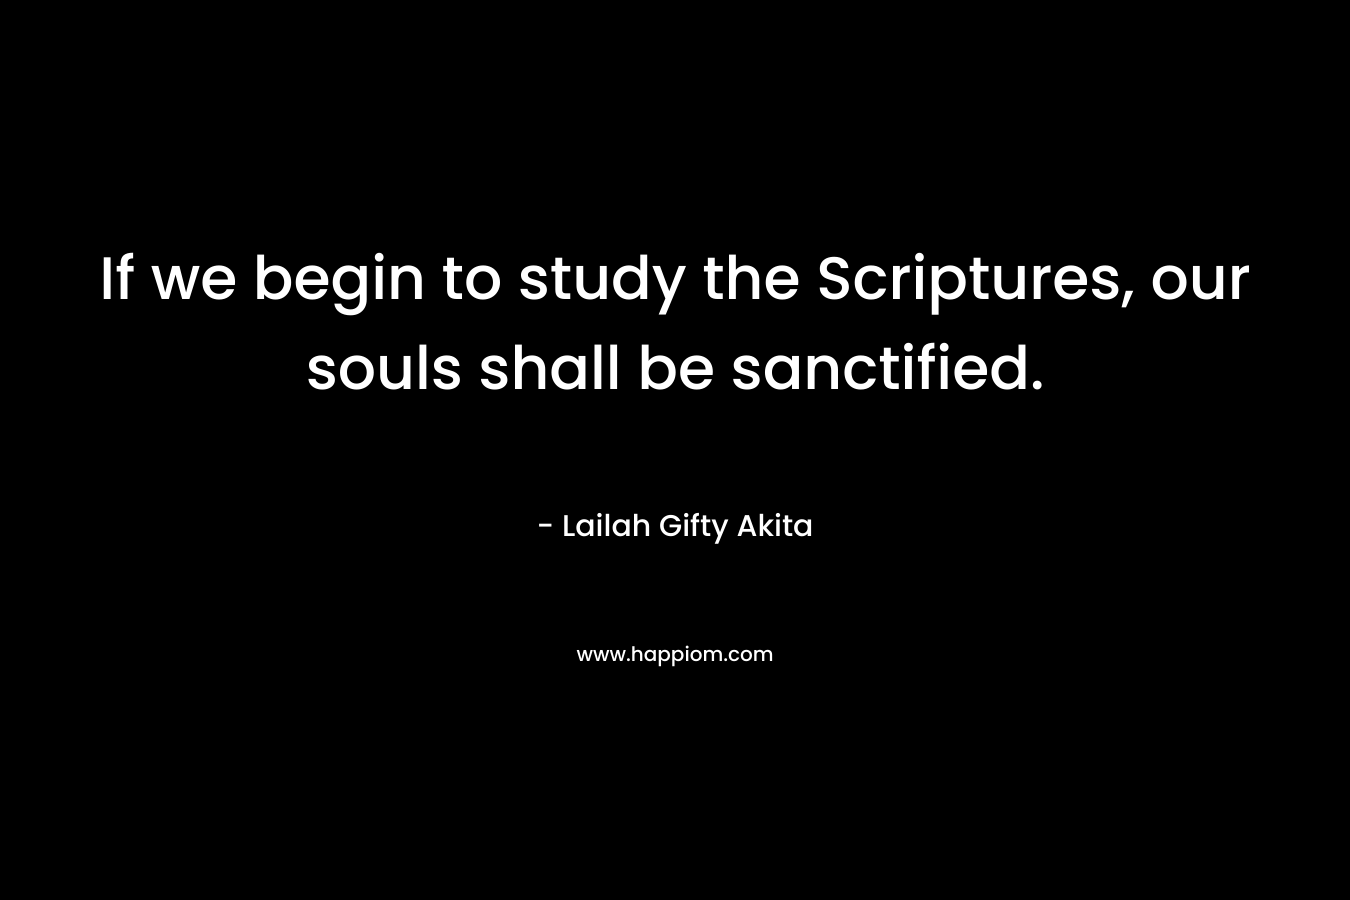 If we begin to study the Scriptures, our souls shall be sanctified.